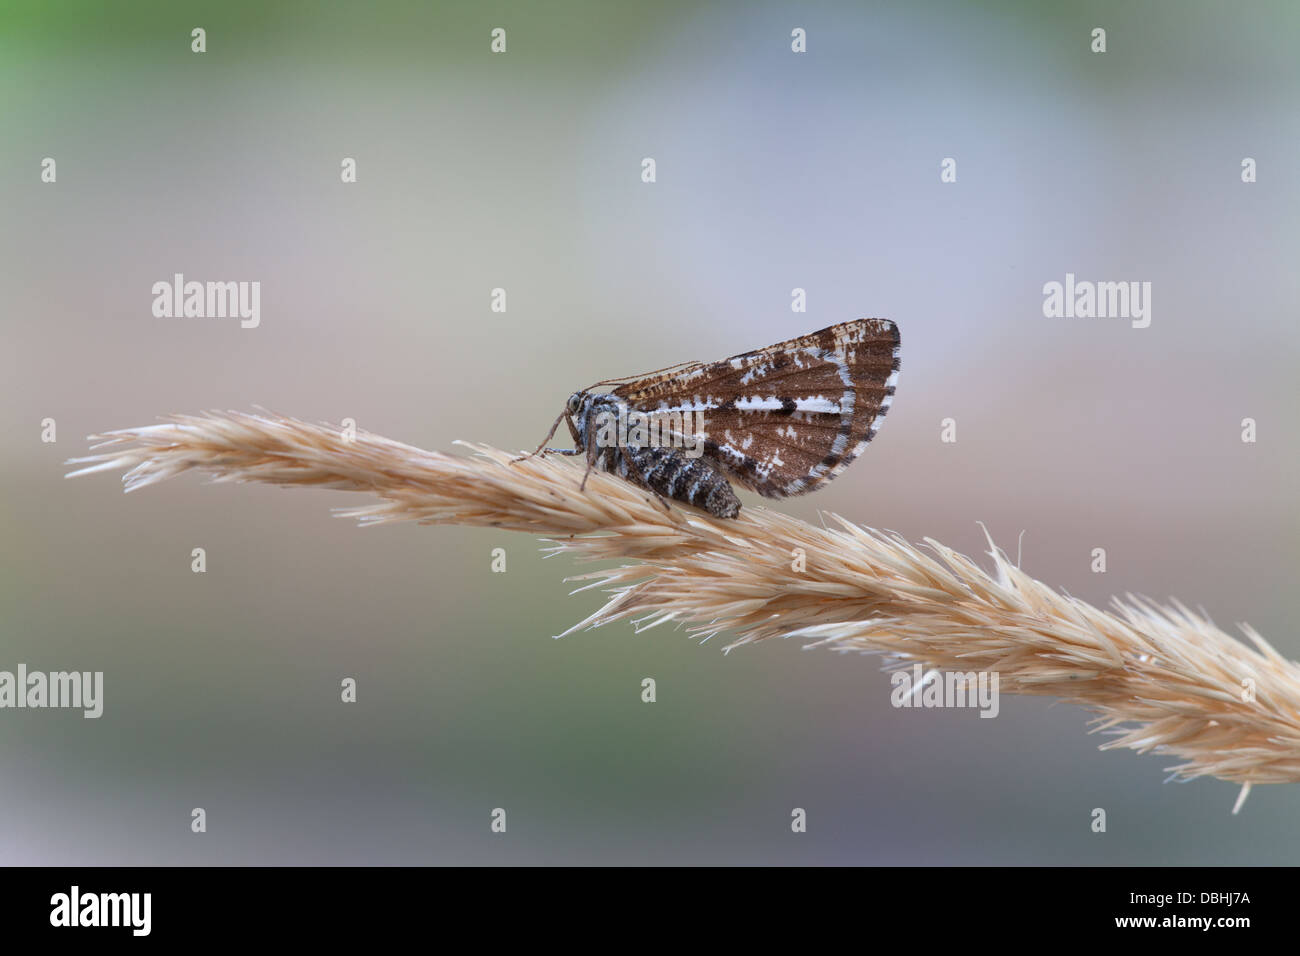 Bordered White Bupalus piniaria adult female at rest a grass seed head Stock Photo